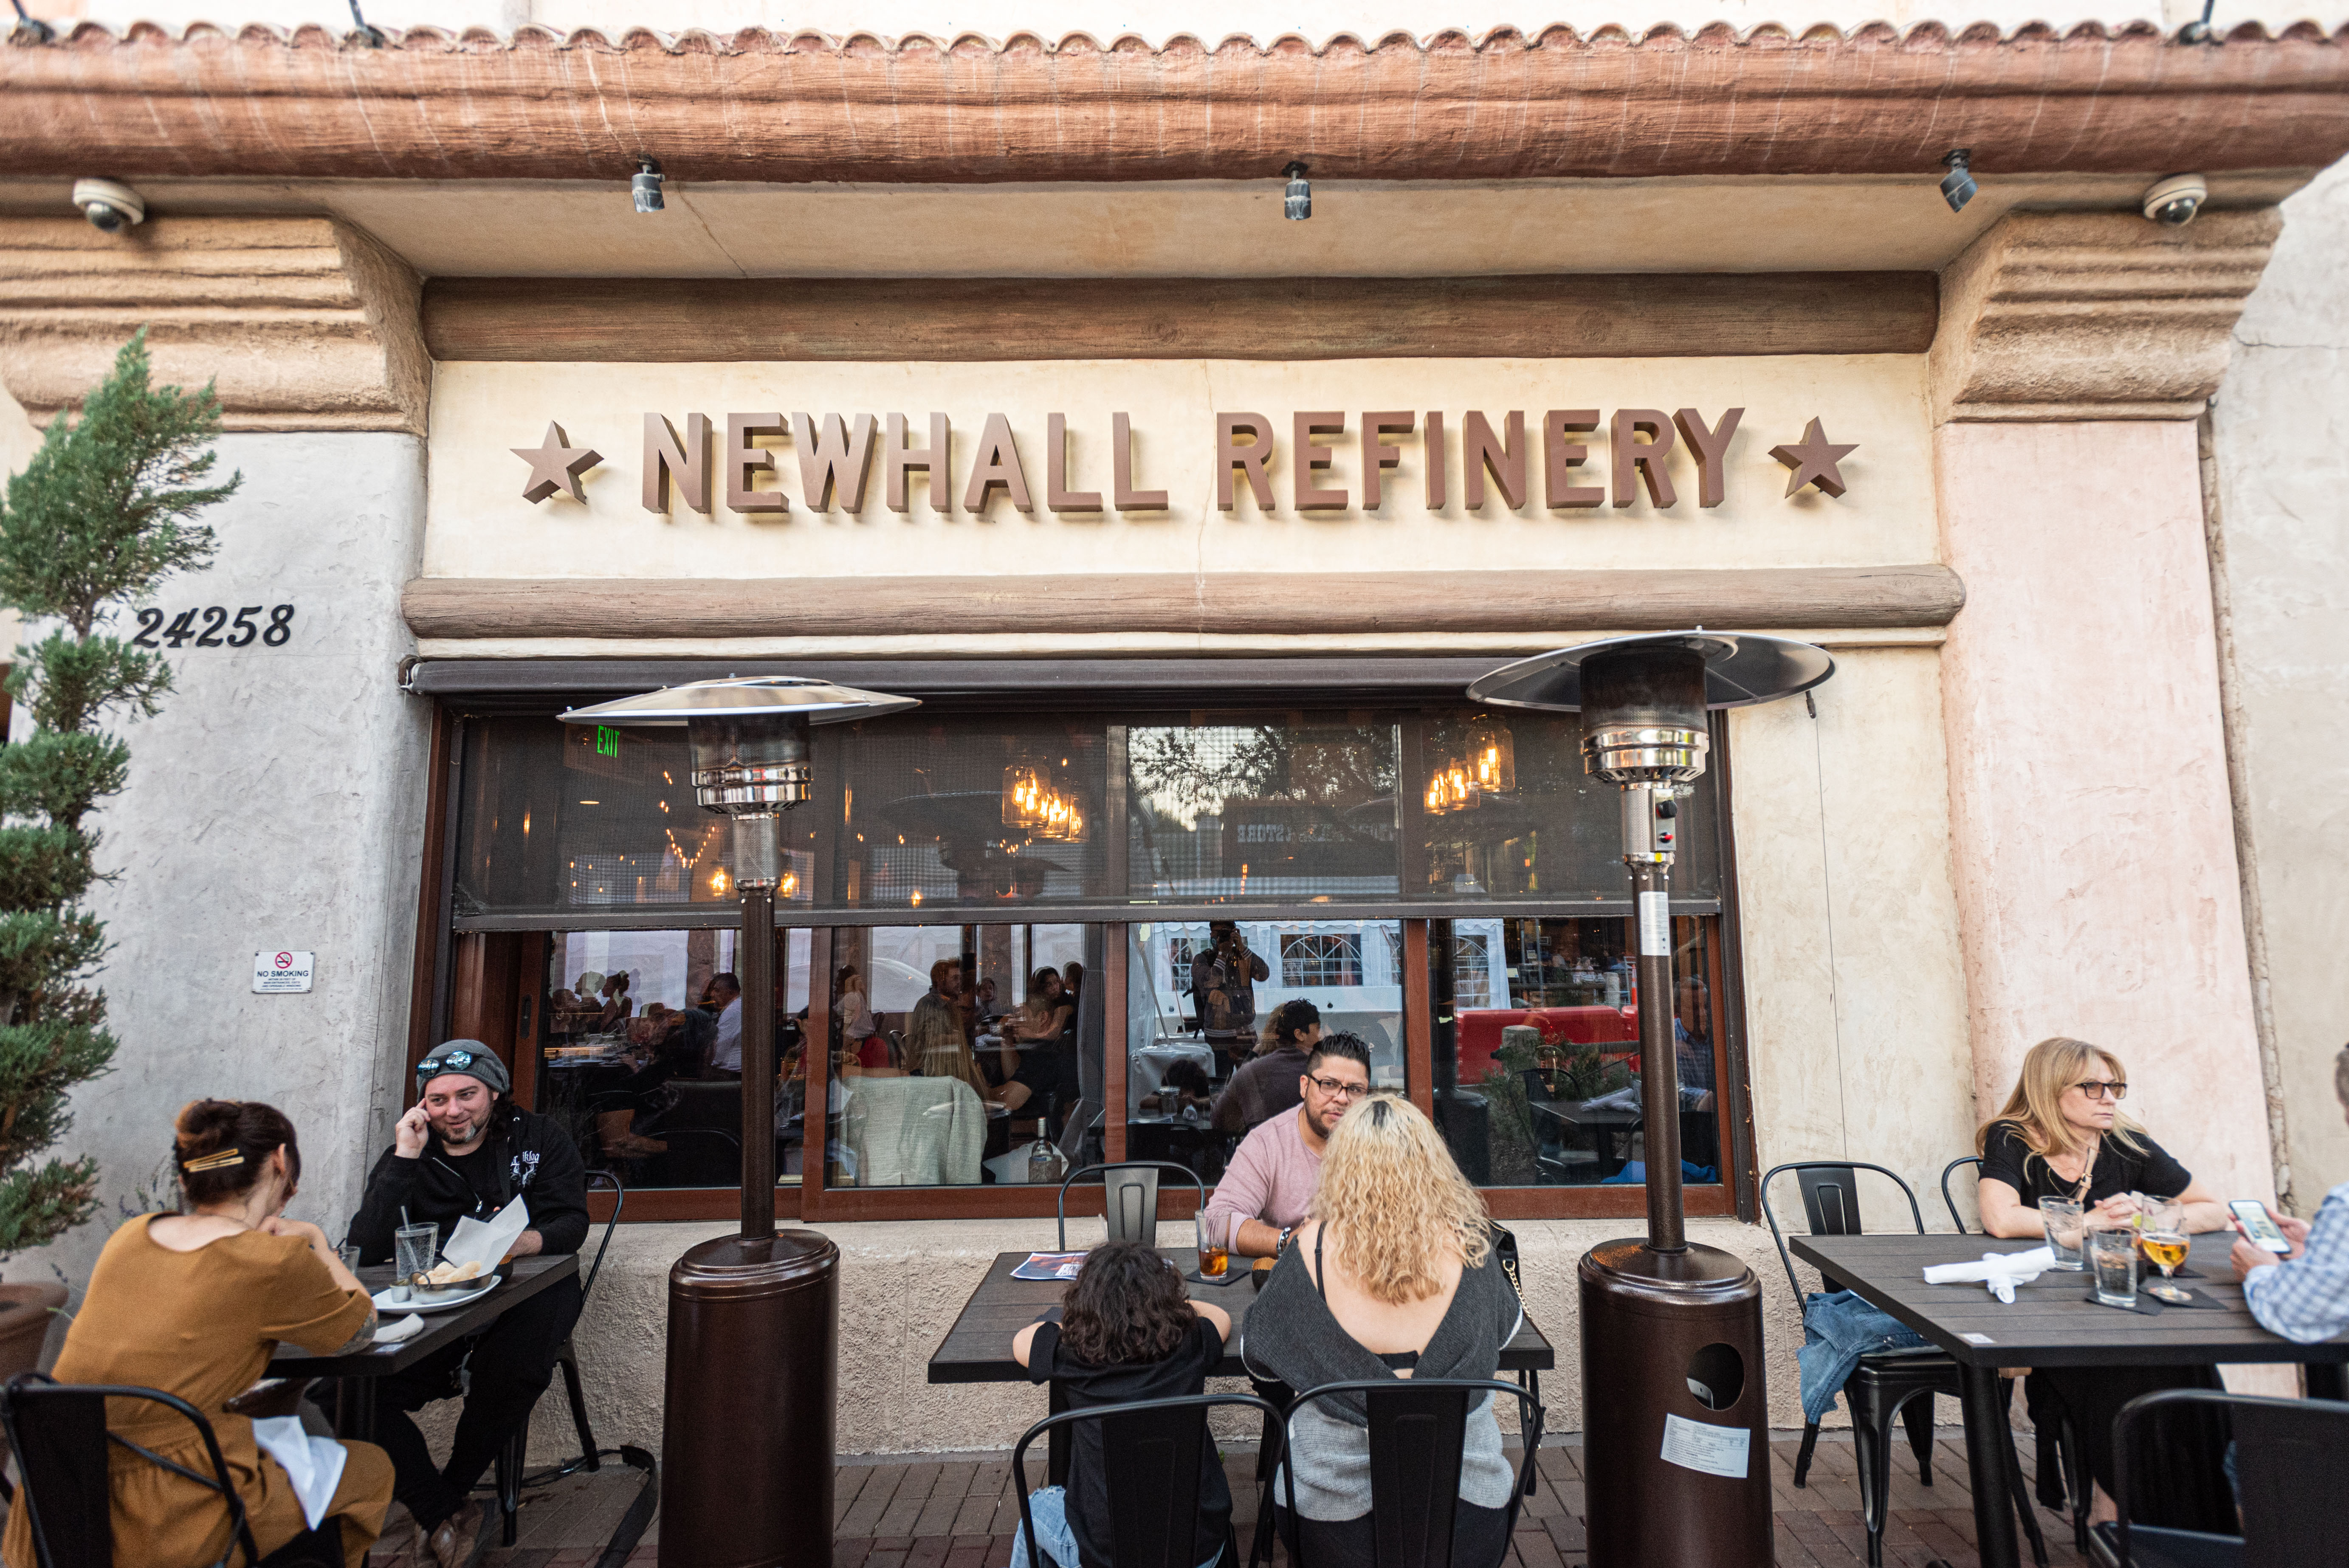 Newhall Refinery gastropub with diners on a Saturday evening in Santa Clarita.